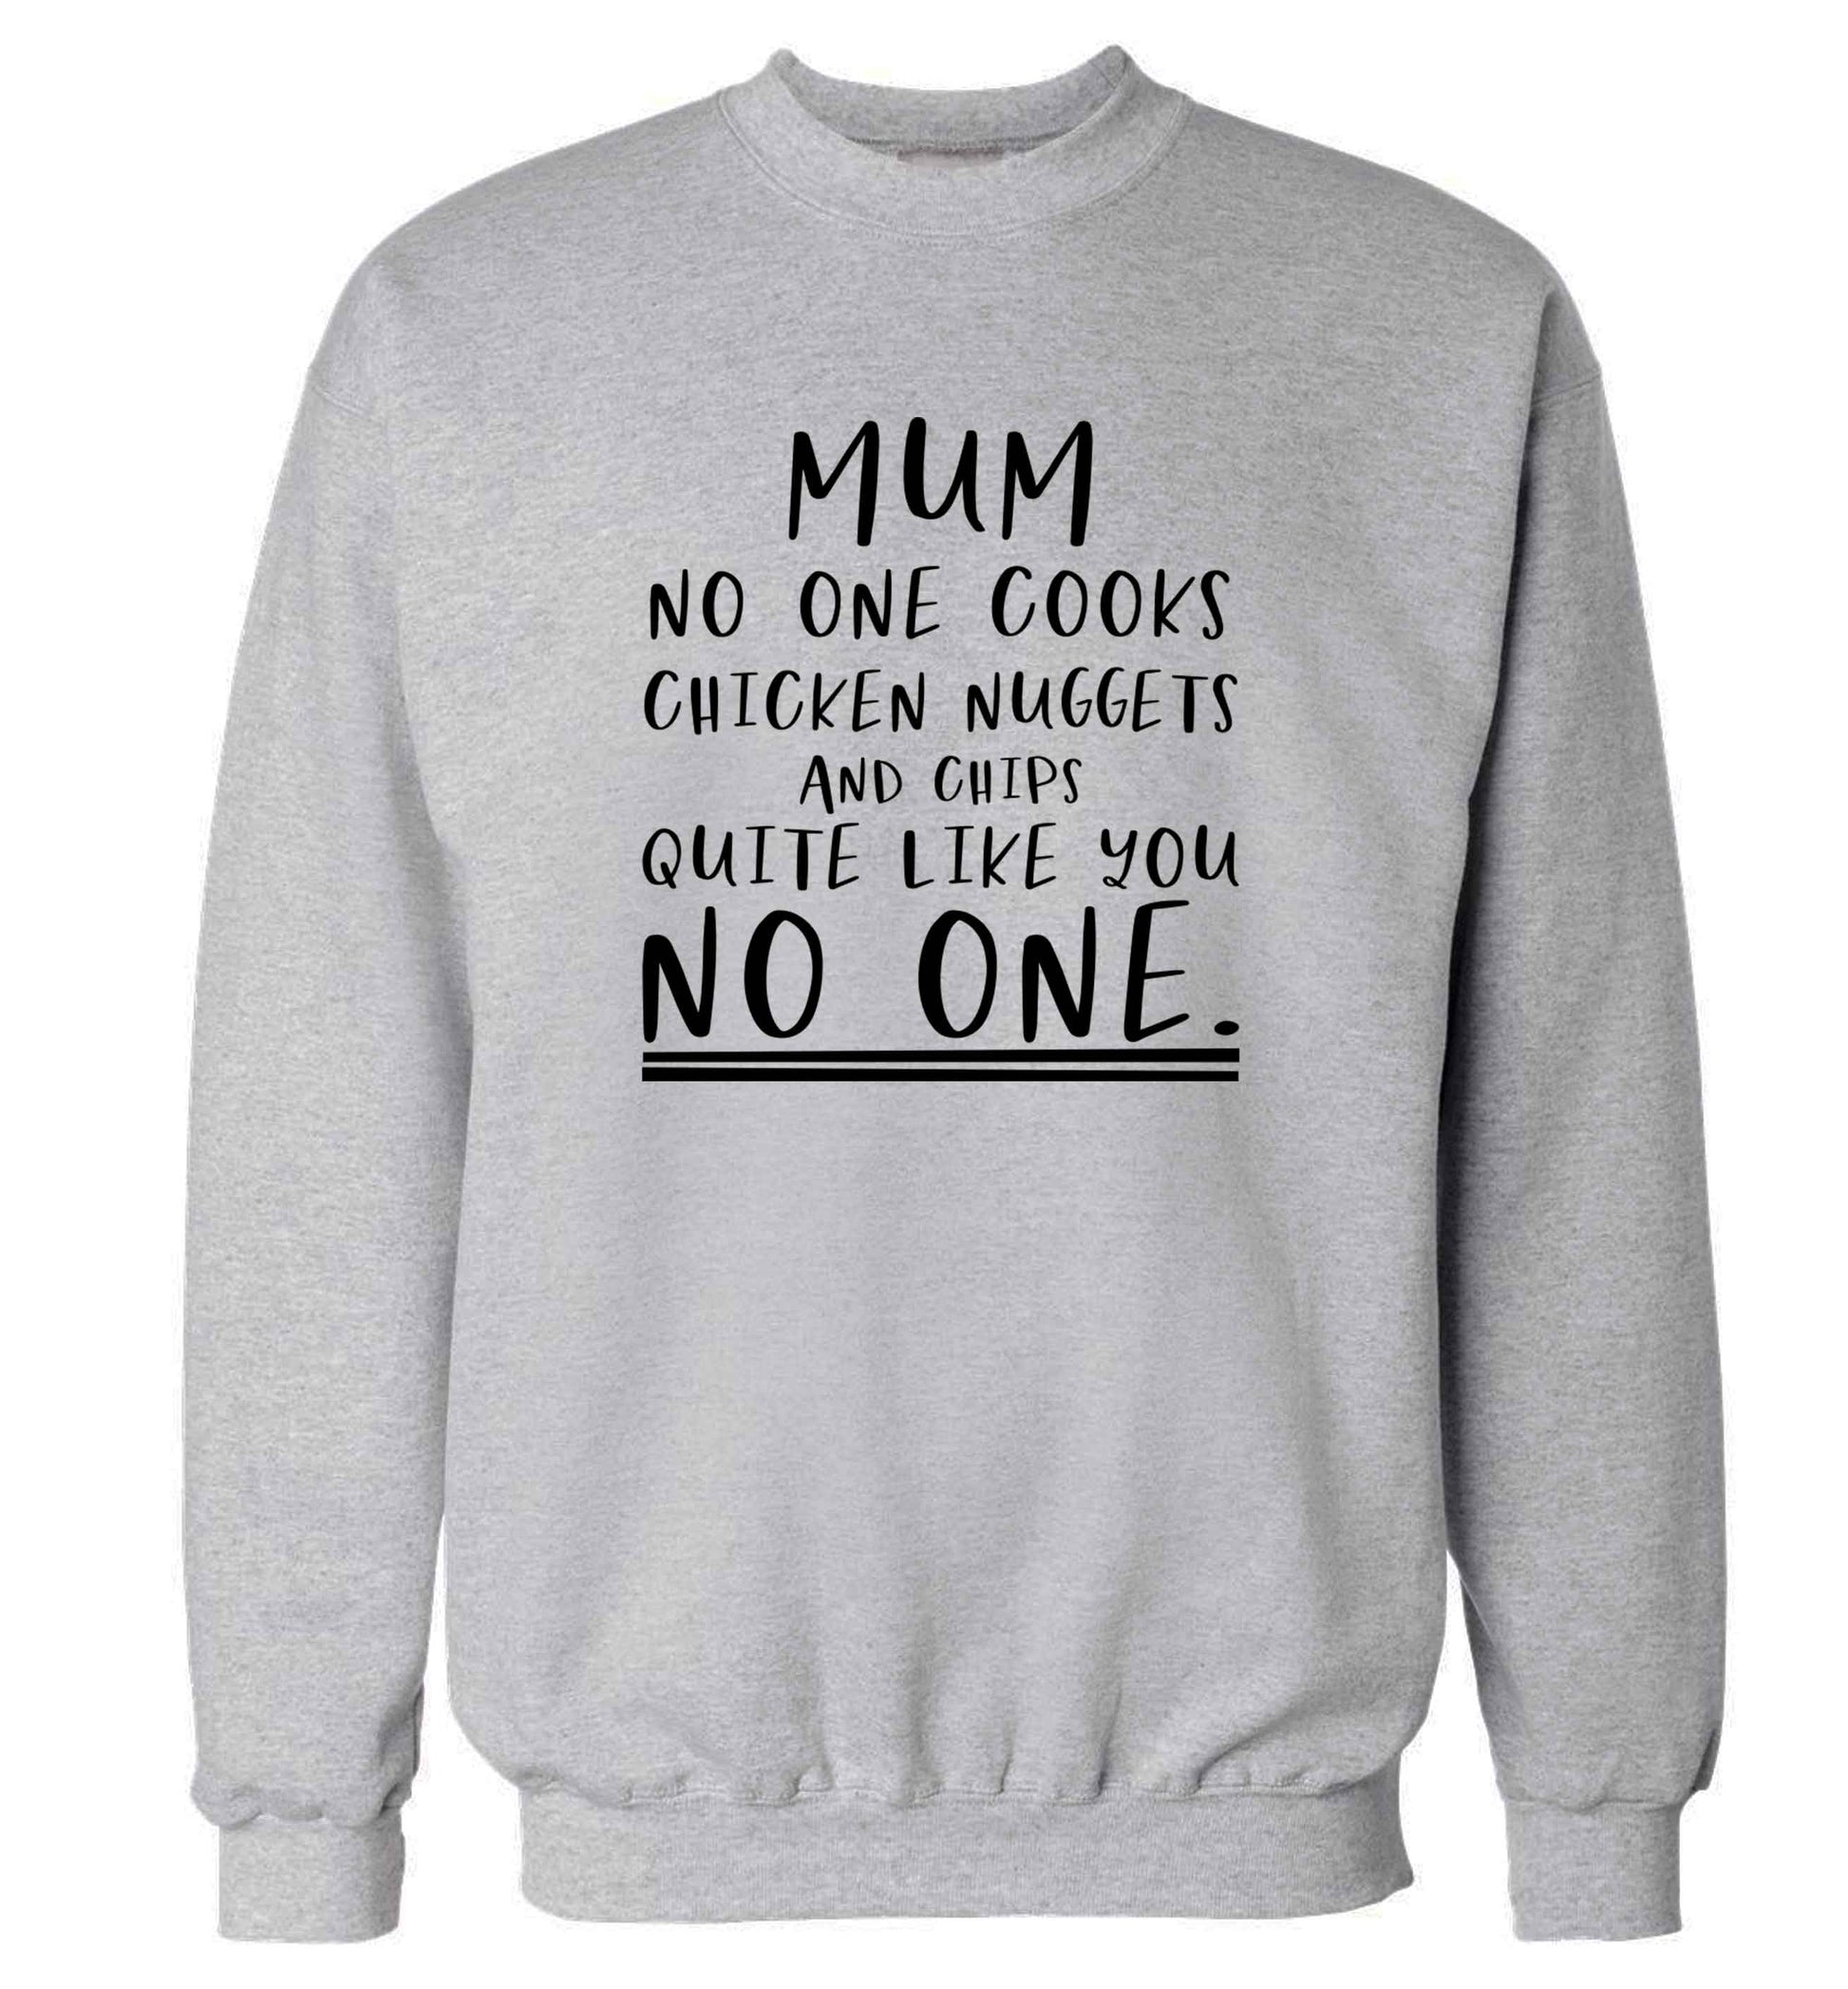 Super funny sassy gift for mother's day or birthday!  Mum no one cooks chicken nuggets and chips like you no one adult's unisex grey sweater 2XL